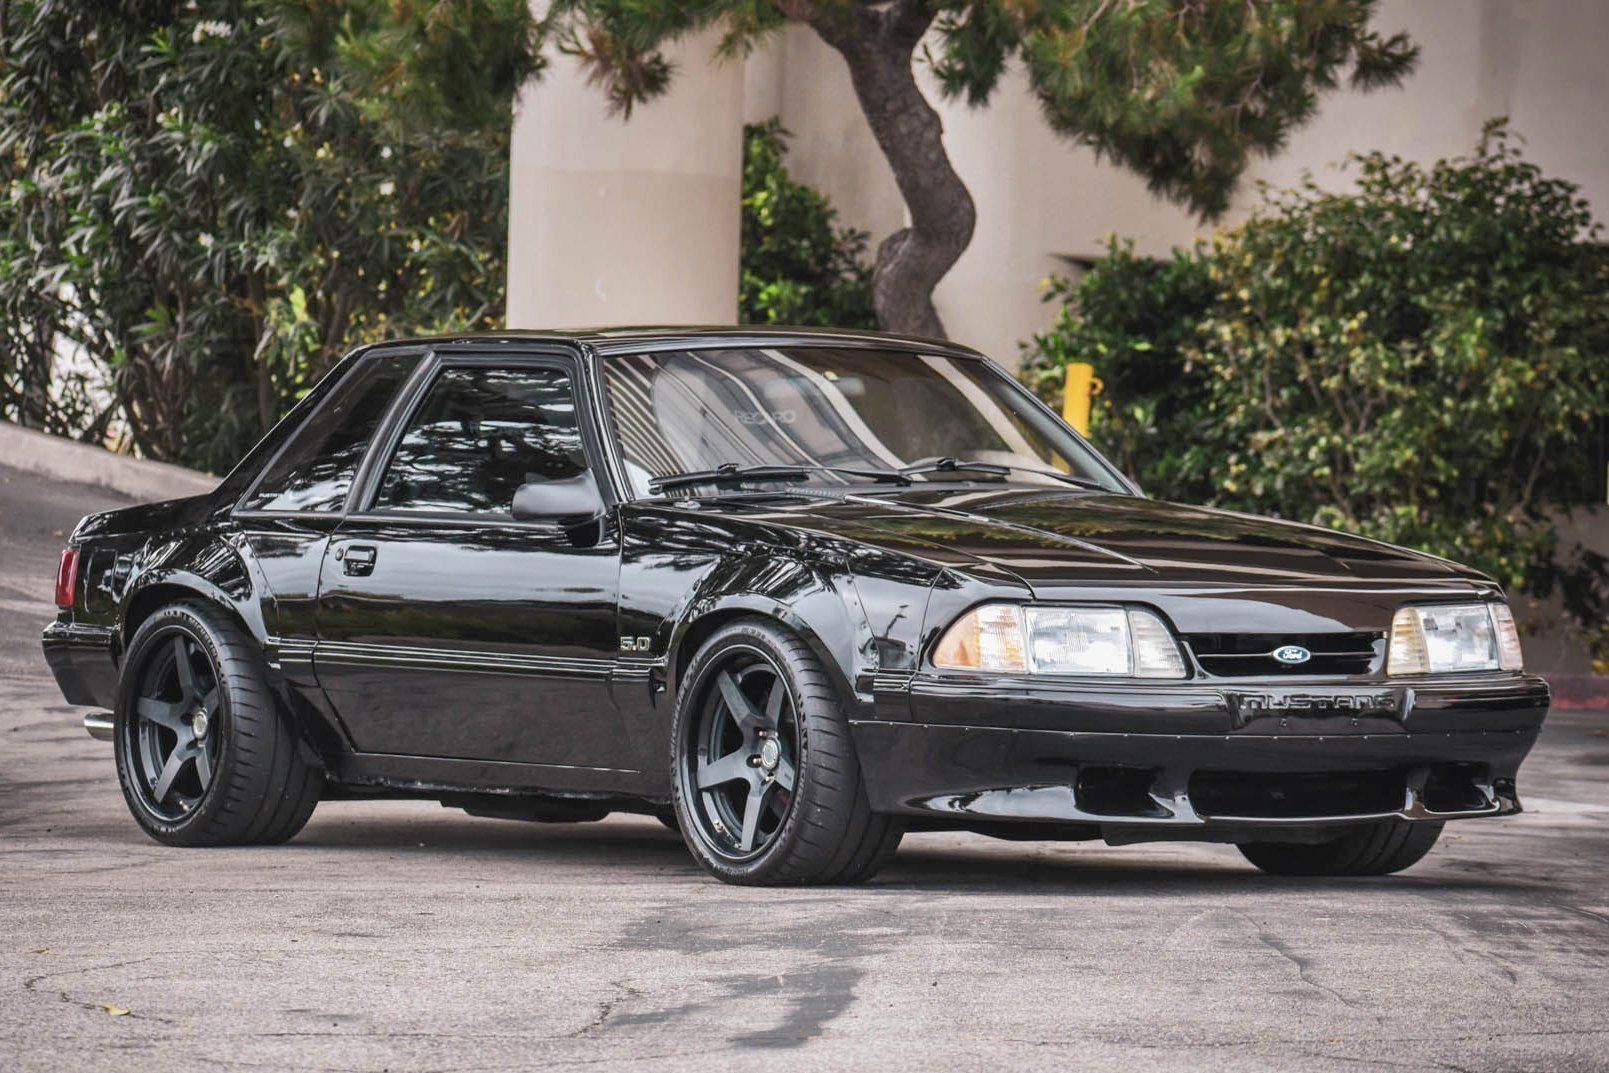 Ford Mustang (Foxbody)